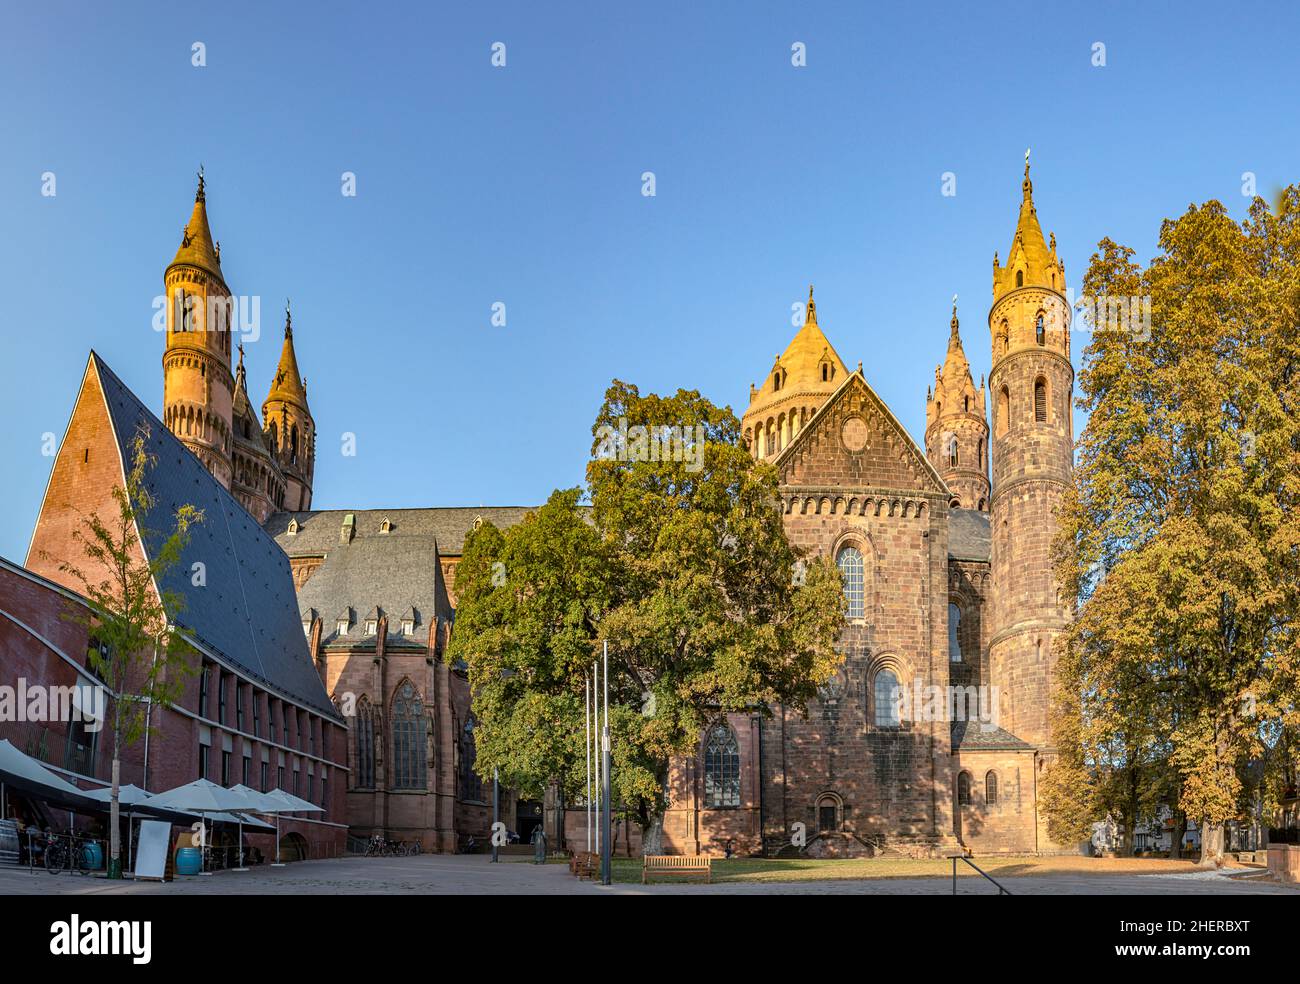 old historic cathedral of Worms, Germany Stock Photo